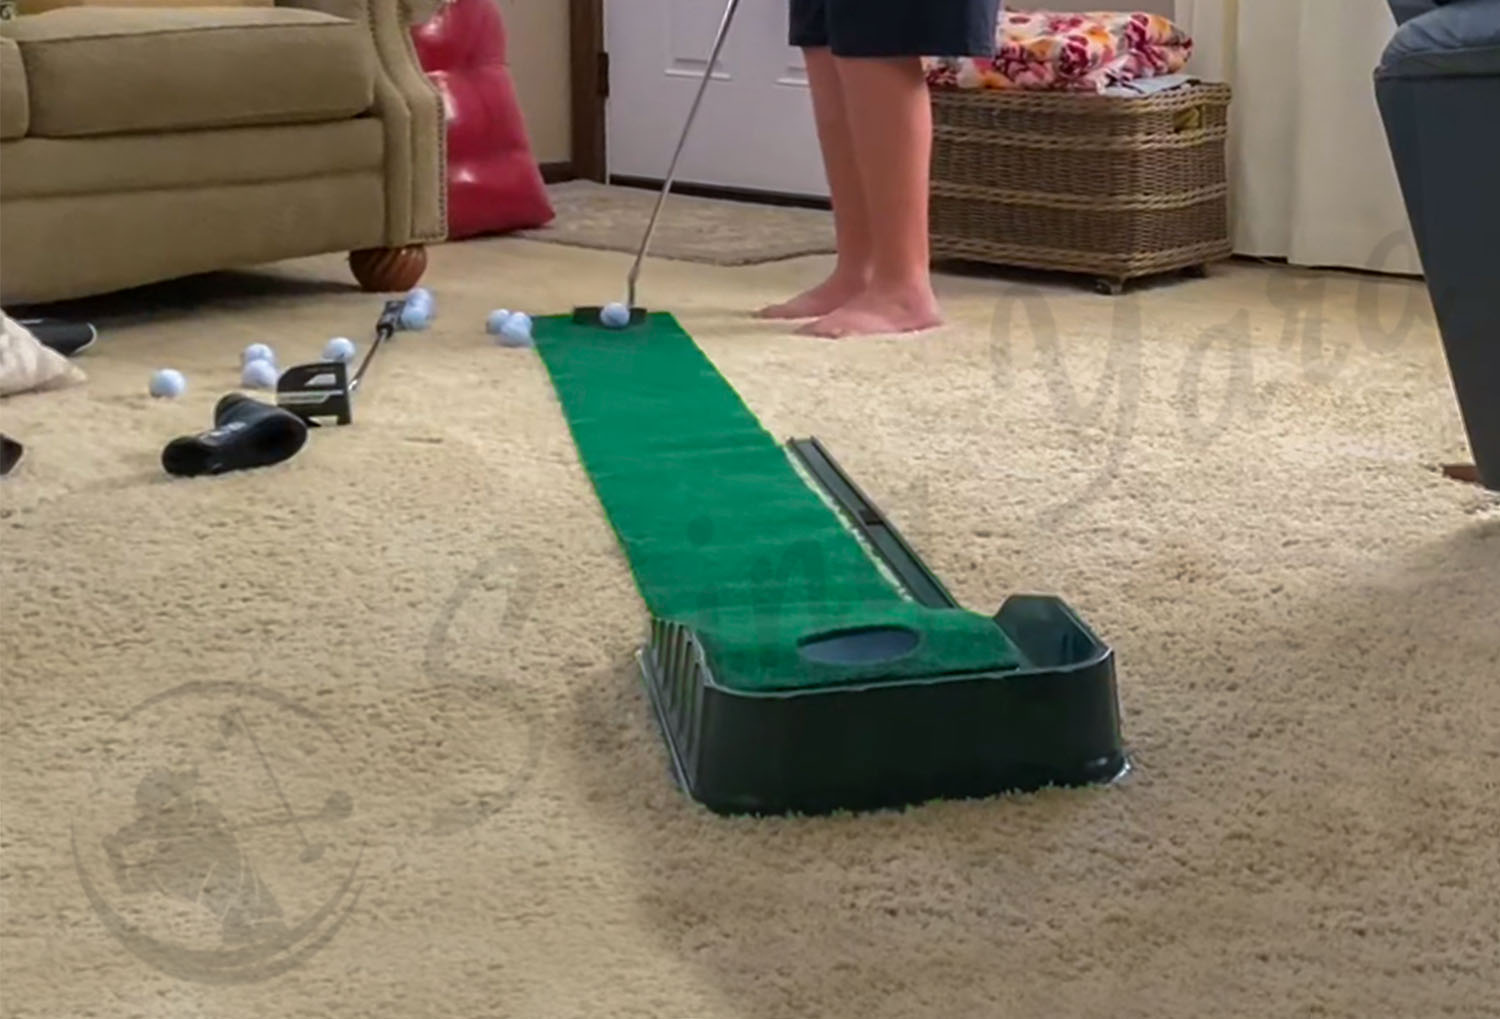 Testing the Club Champ putting set in the living room